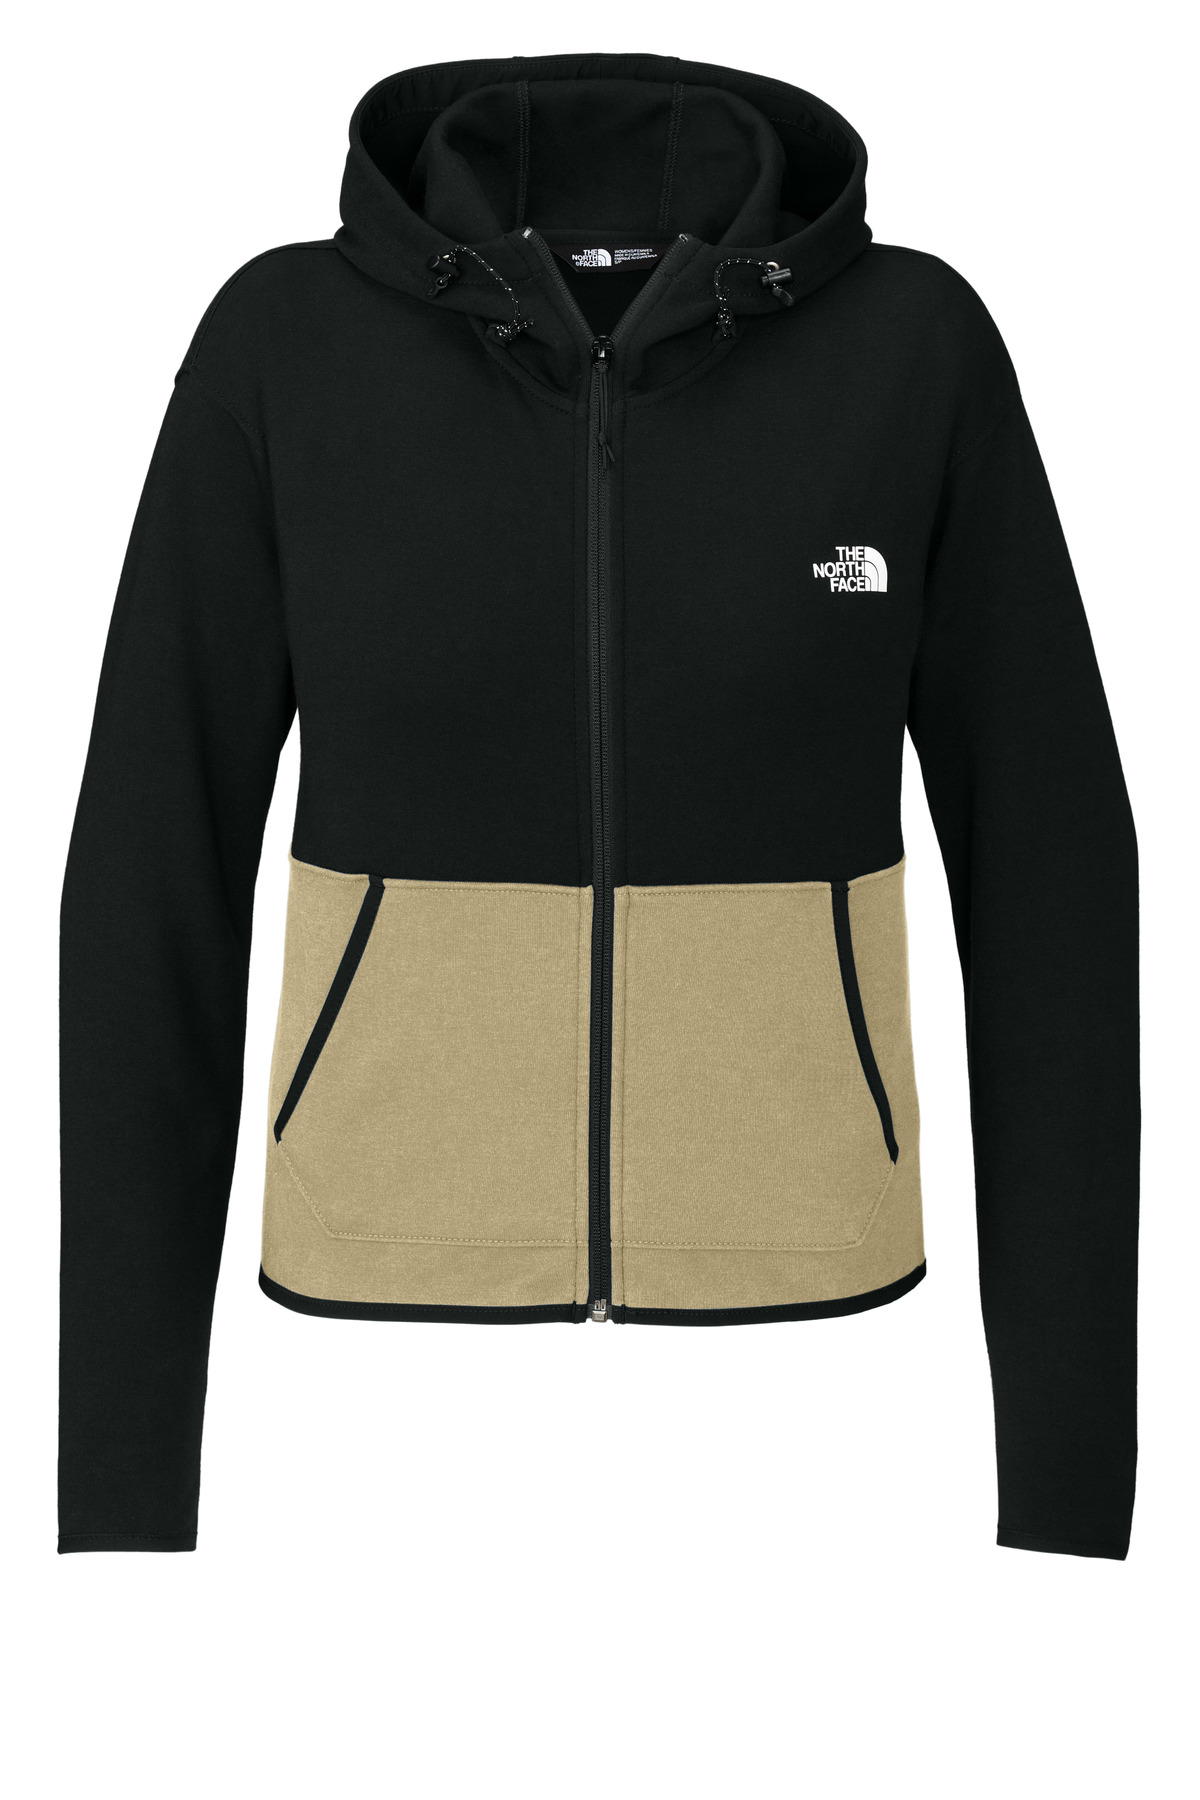 The North Face Ladies Double-Knit Full-Zip Hoodie-